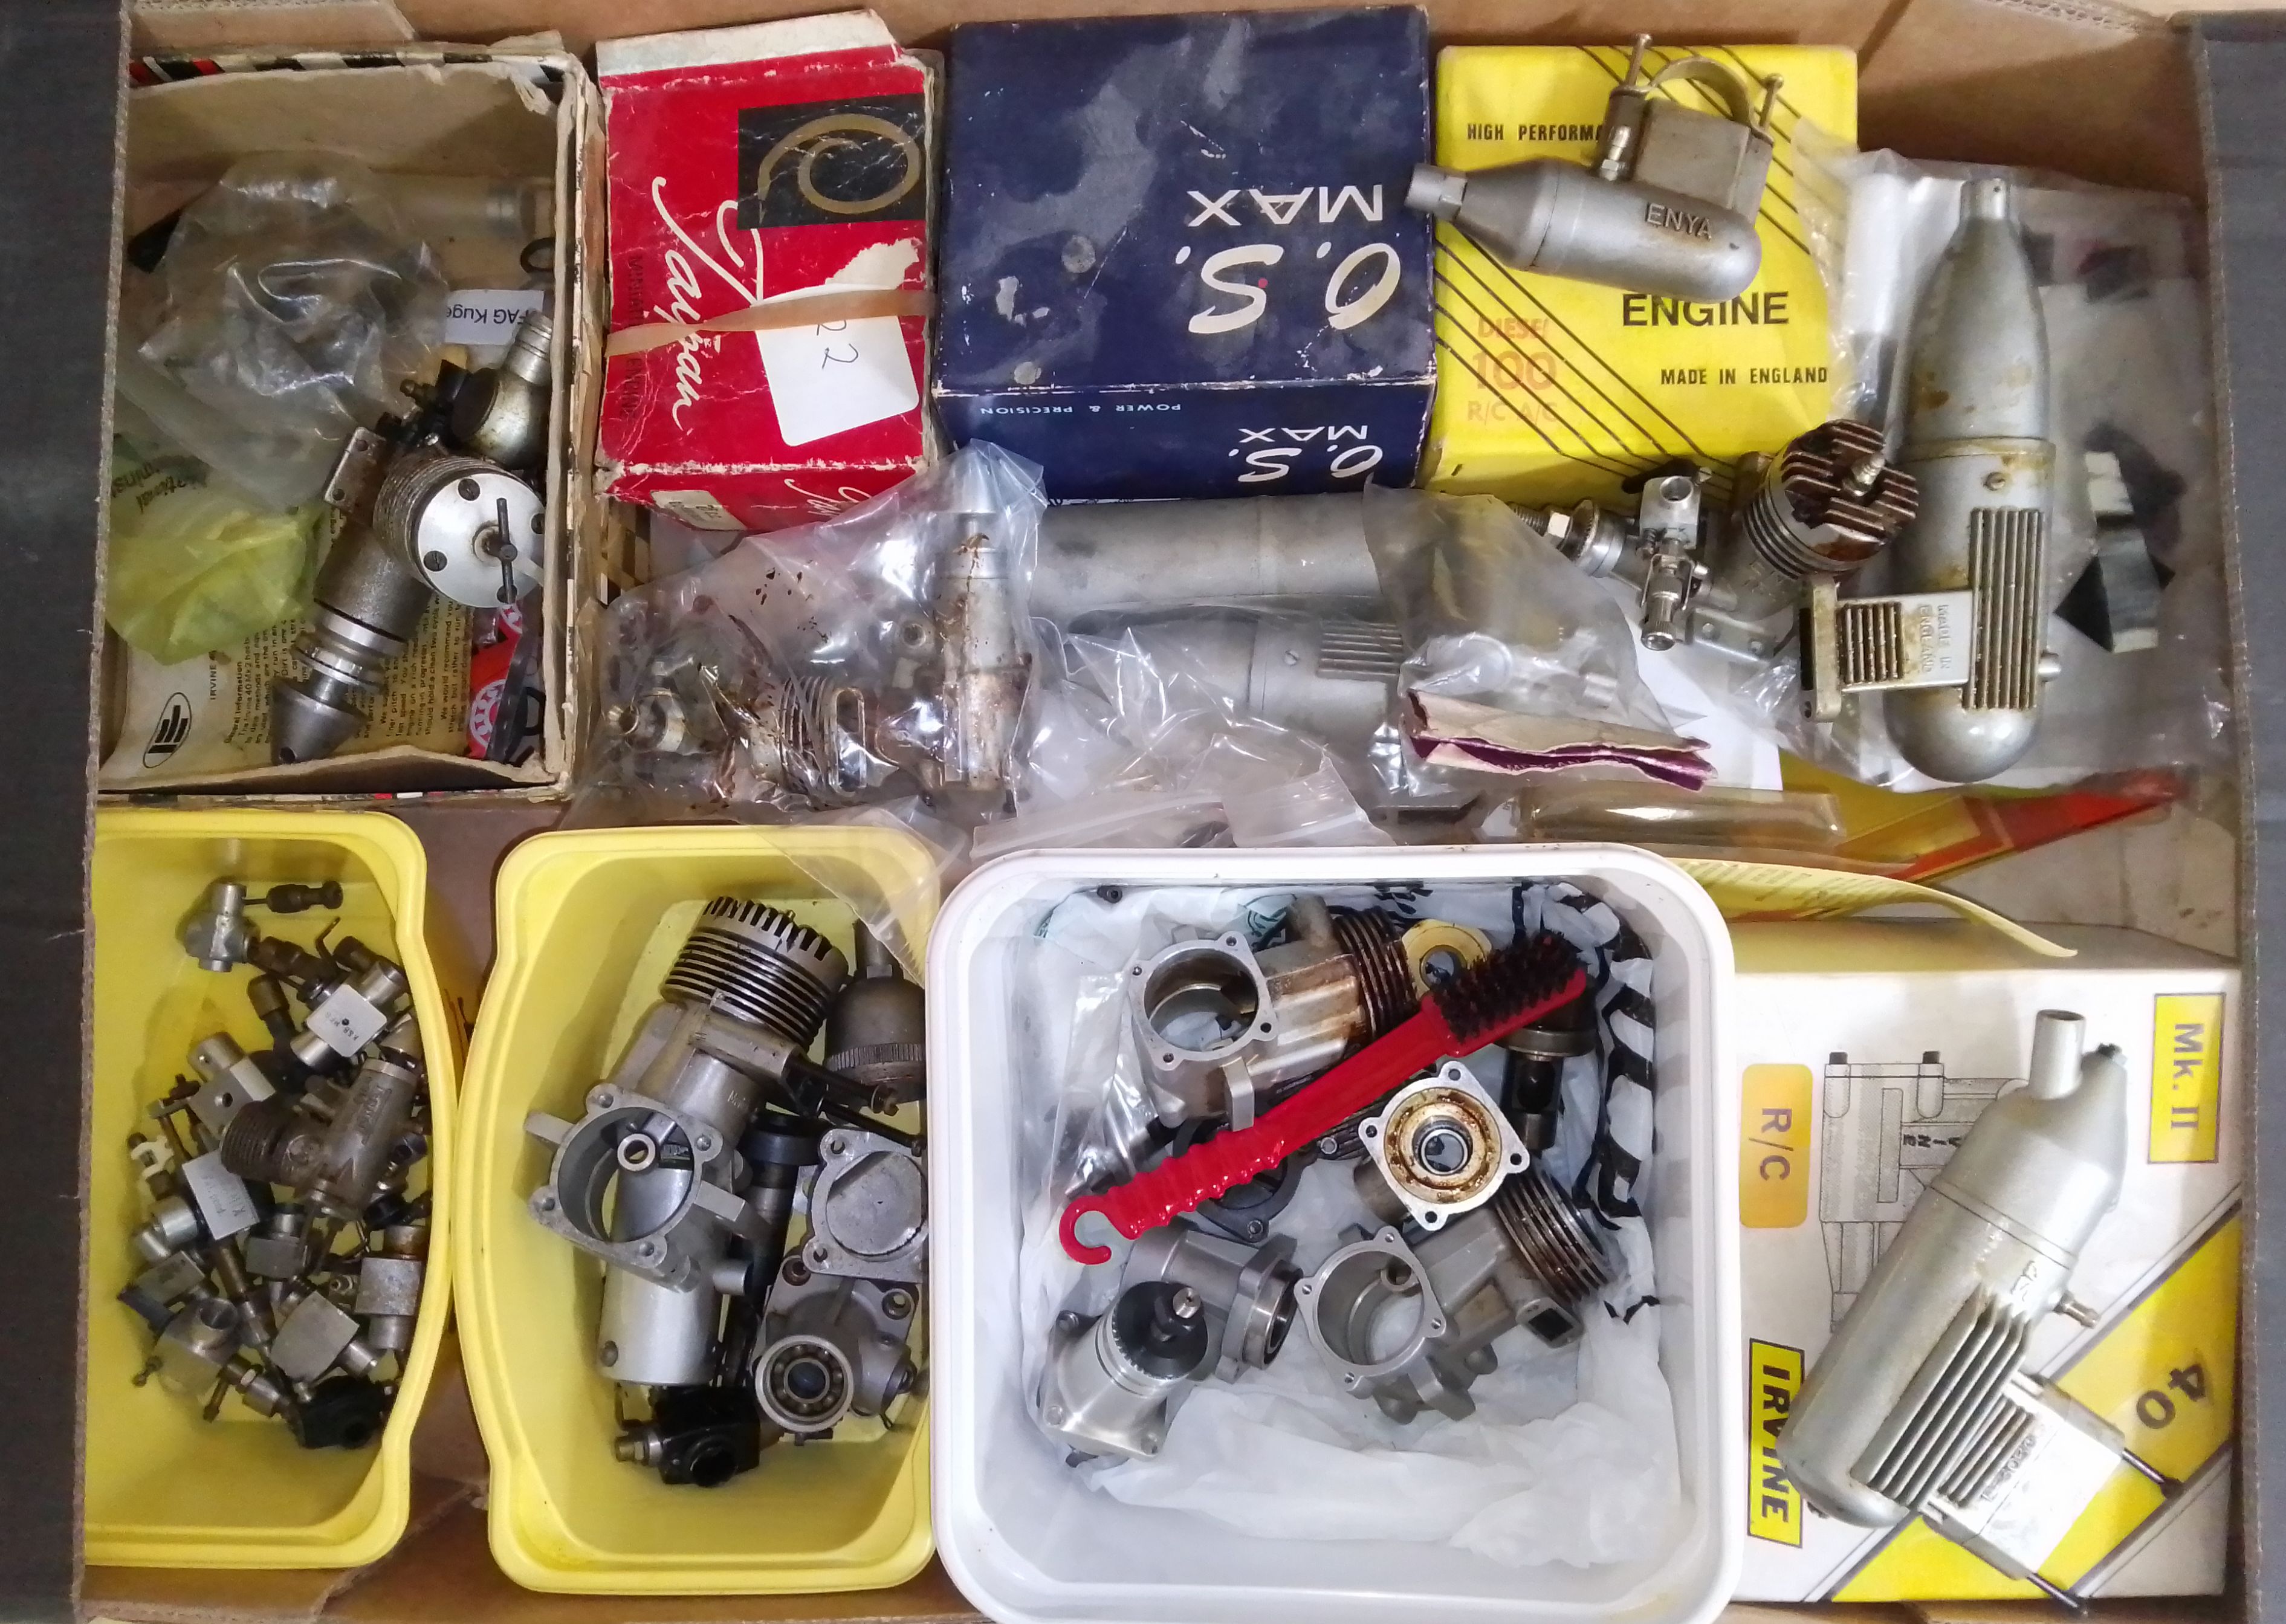 A box of assorted radio control aeroplane engines and parts